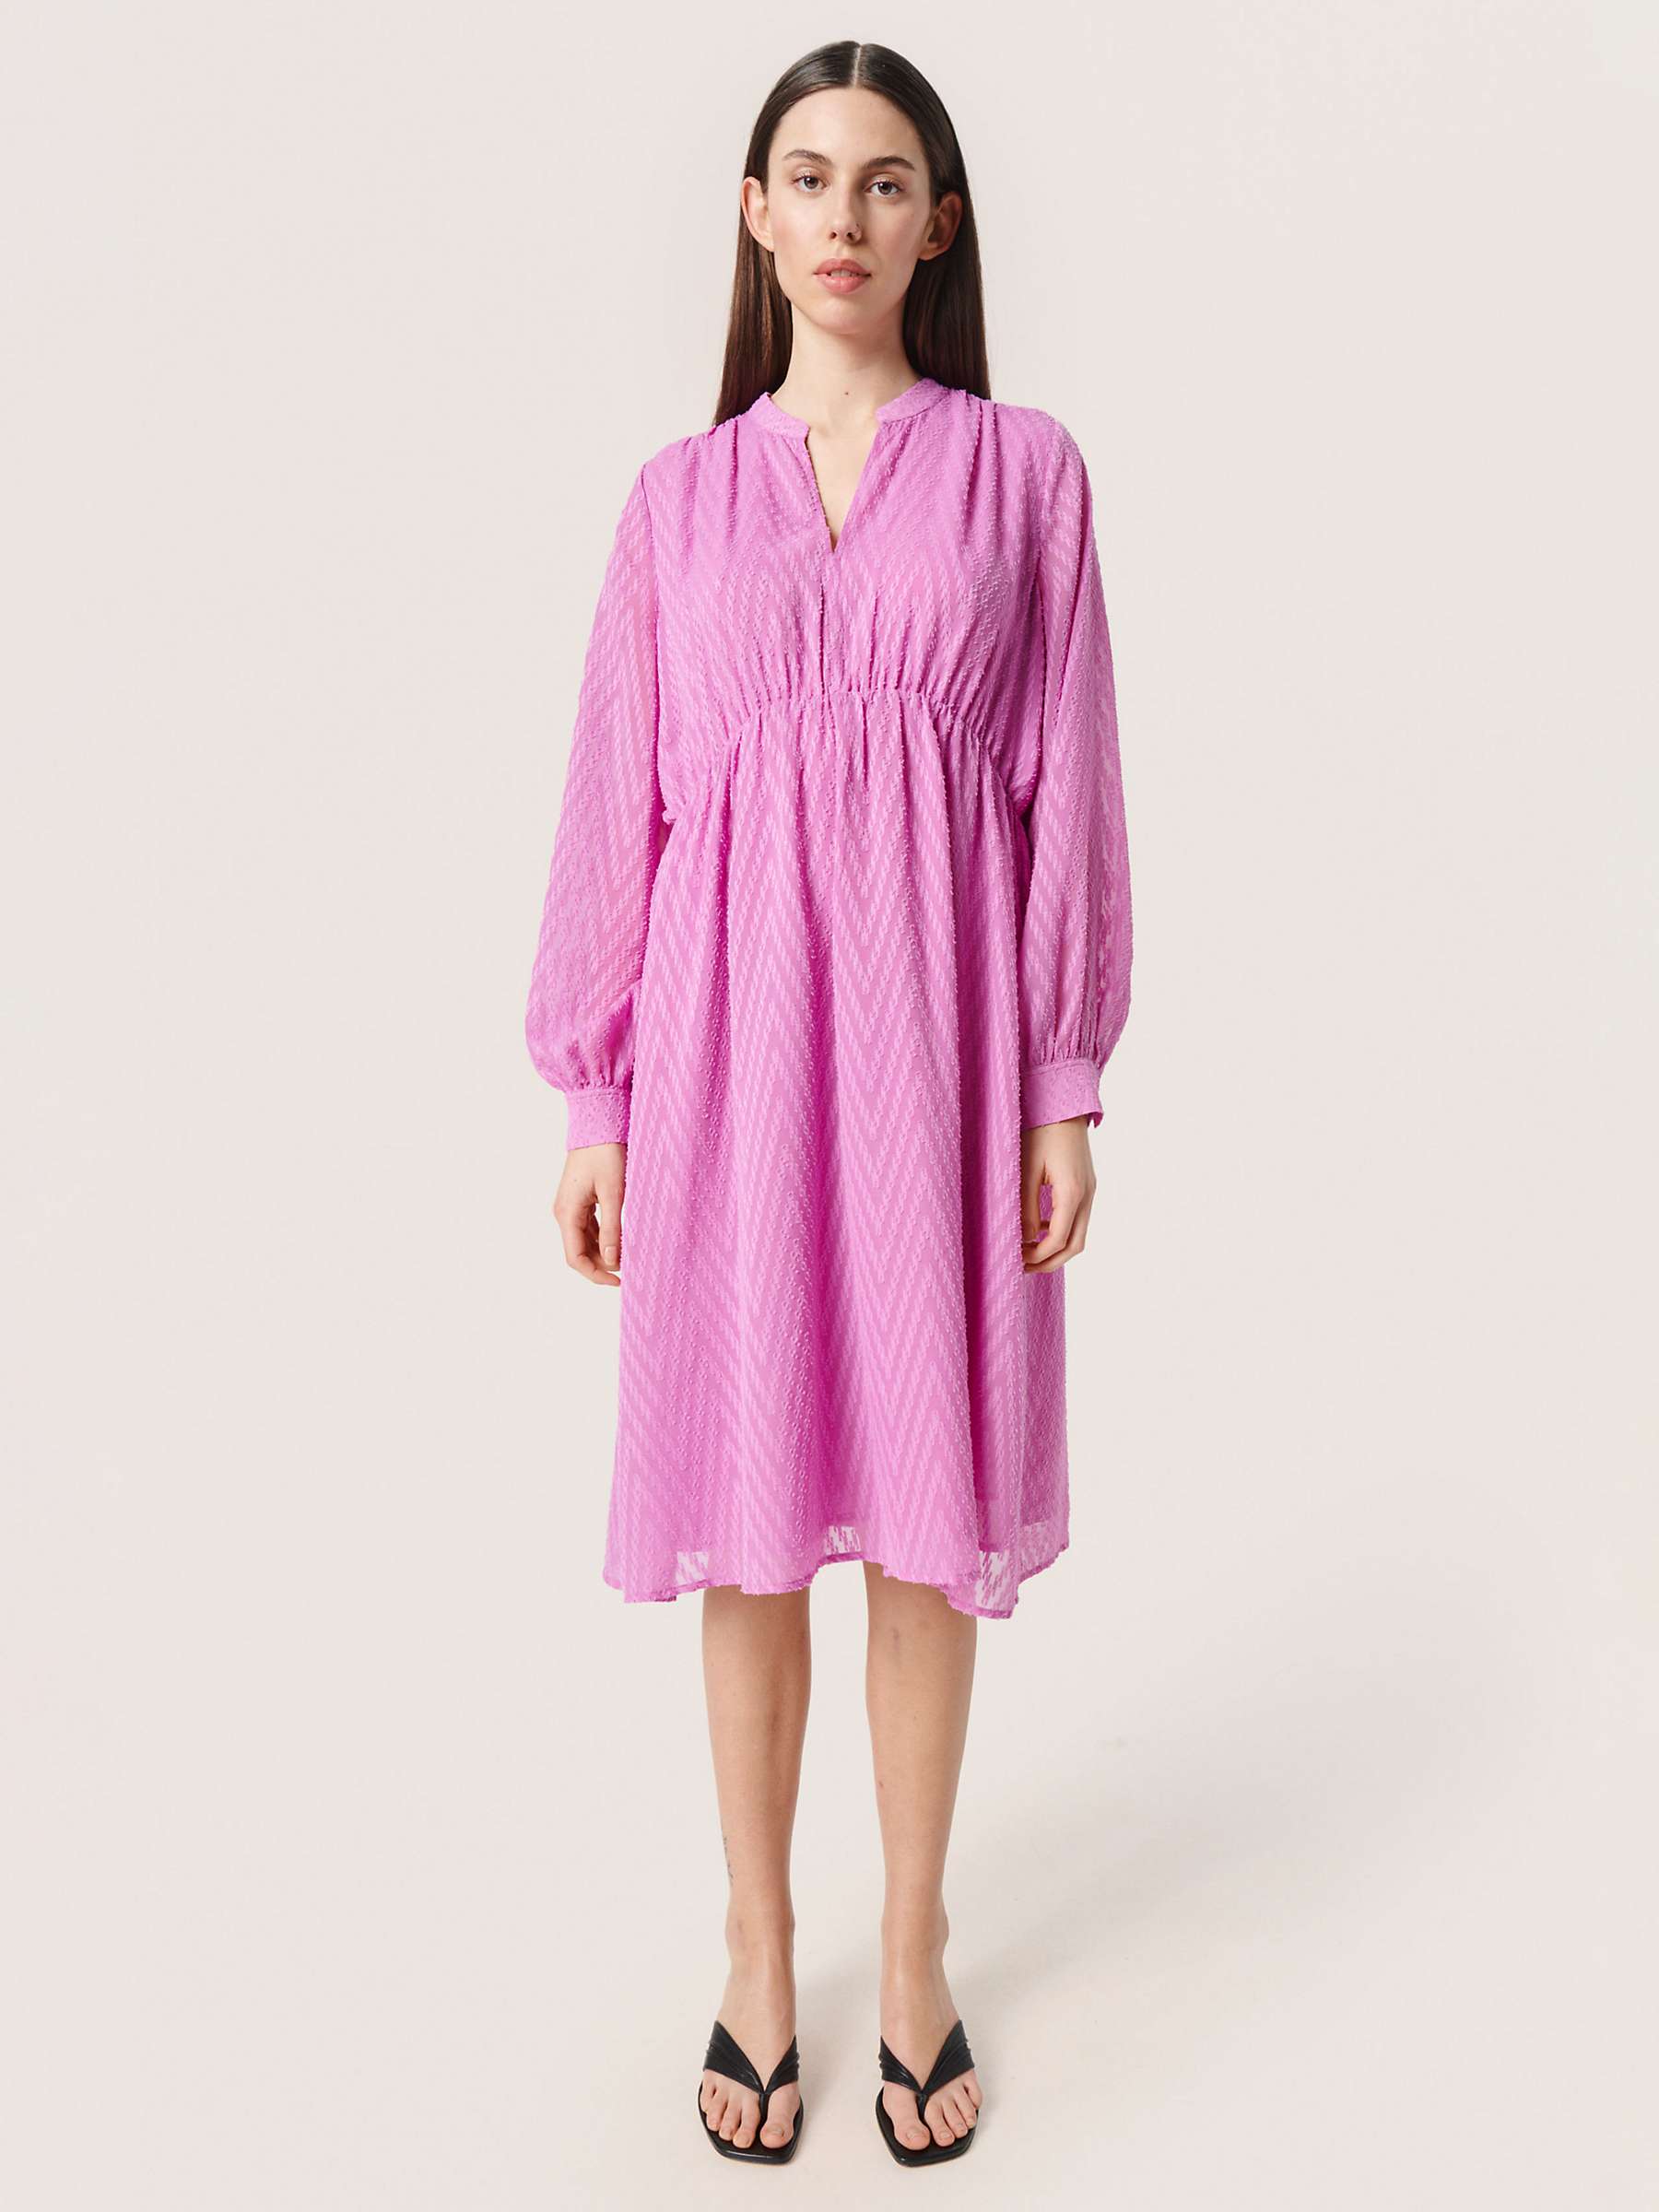 Buy Soaked In Luxury Lavira Luciana Dress, Liatris Online at johnlewis.com